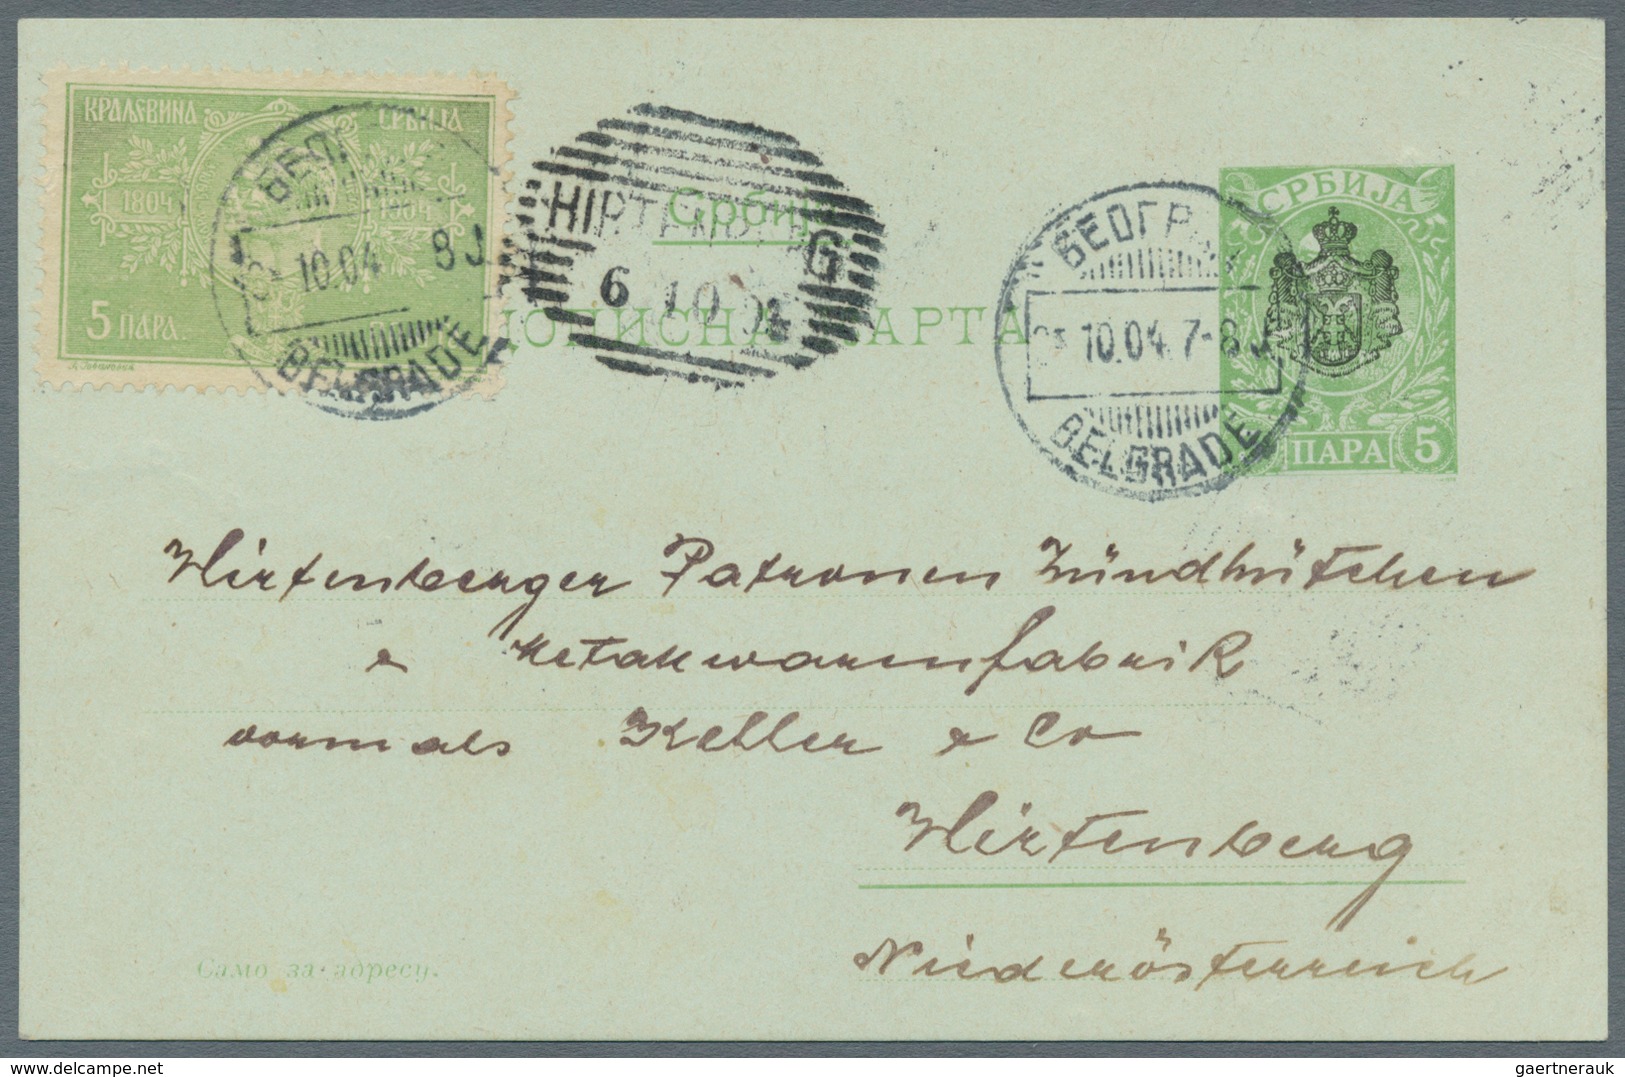 Serbien - Ganzsachen: 1903/1904, Mourning Issue, Group Of Three Uprated Stationery Cards 5pa. Green - Serbie